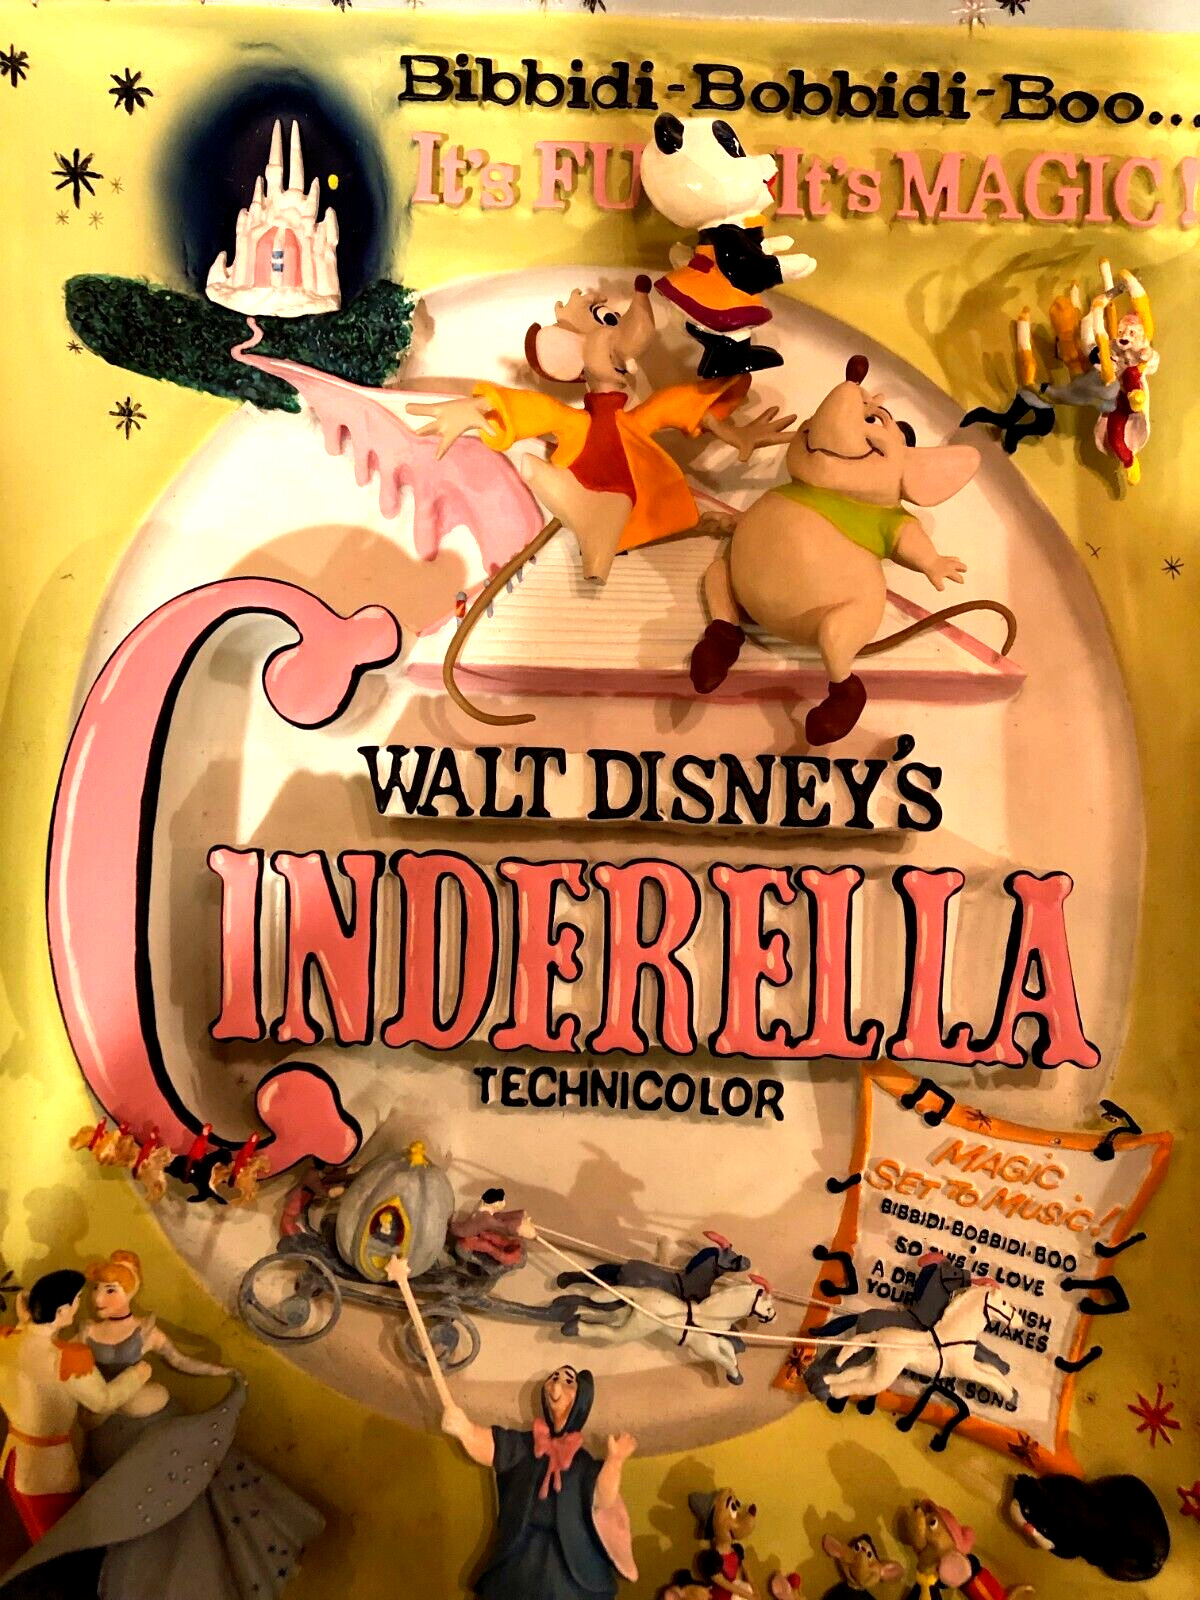 Disney  CAST  Cinderella Sculpted 3D Movie Poster - CODE 3 - NEW iN BOX RETIRED